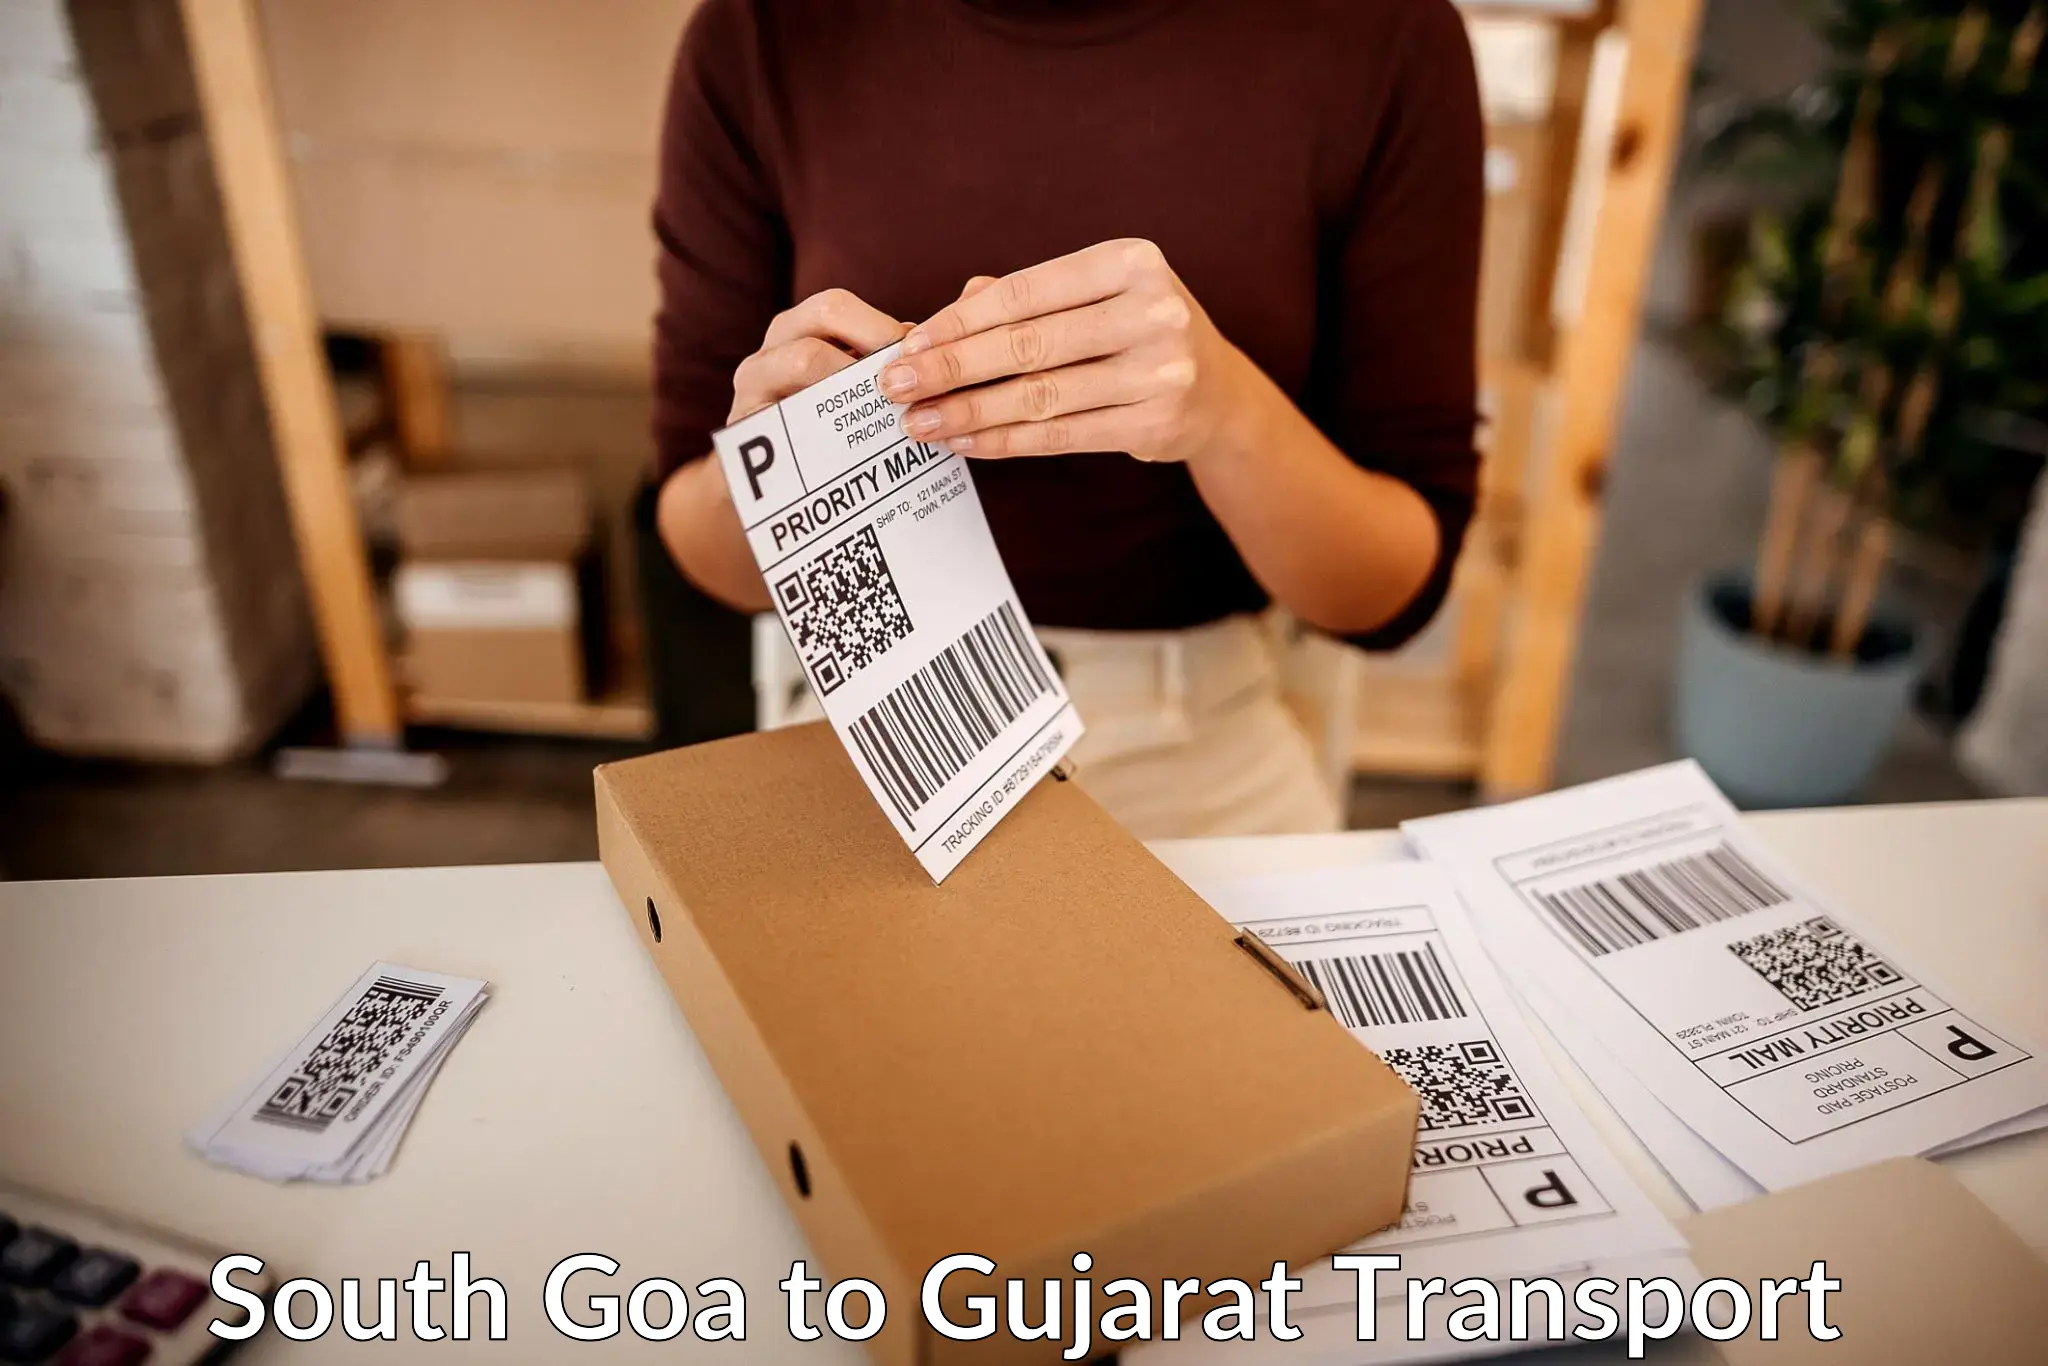 Domestic goods transportation services South Goa to Gandhidham